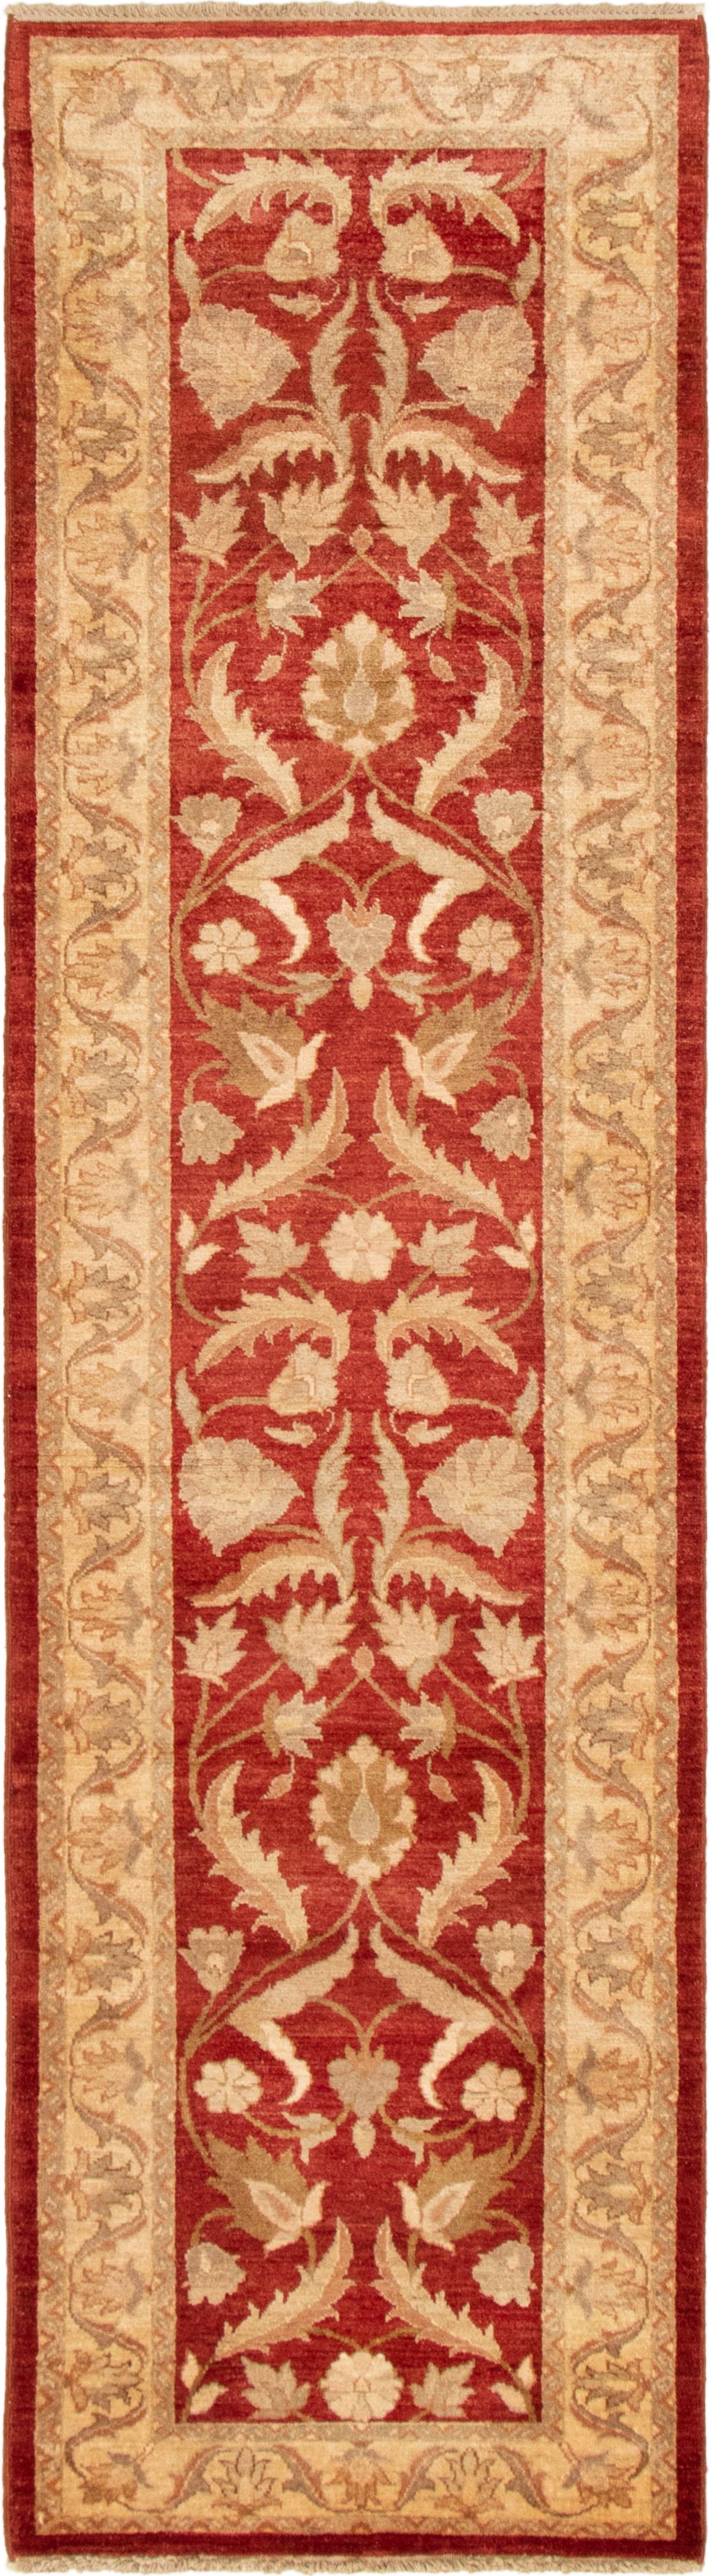 Hand-knotted Chobi Finest Dark Red Wool Rug 2'7" x 10'1" Size: 2'7" x 10'1"  